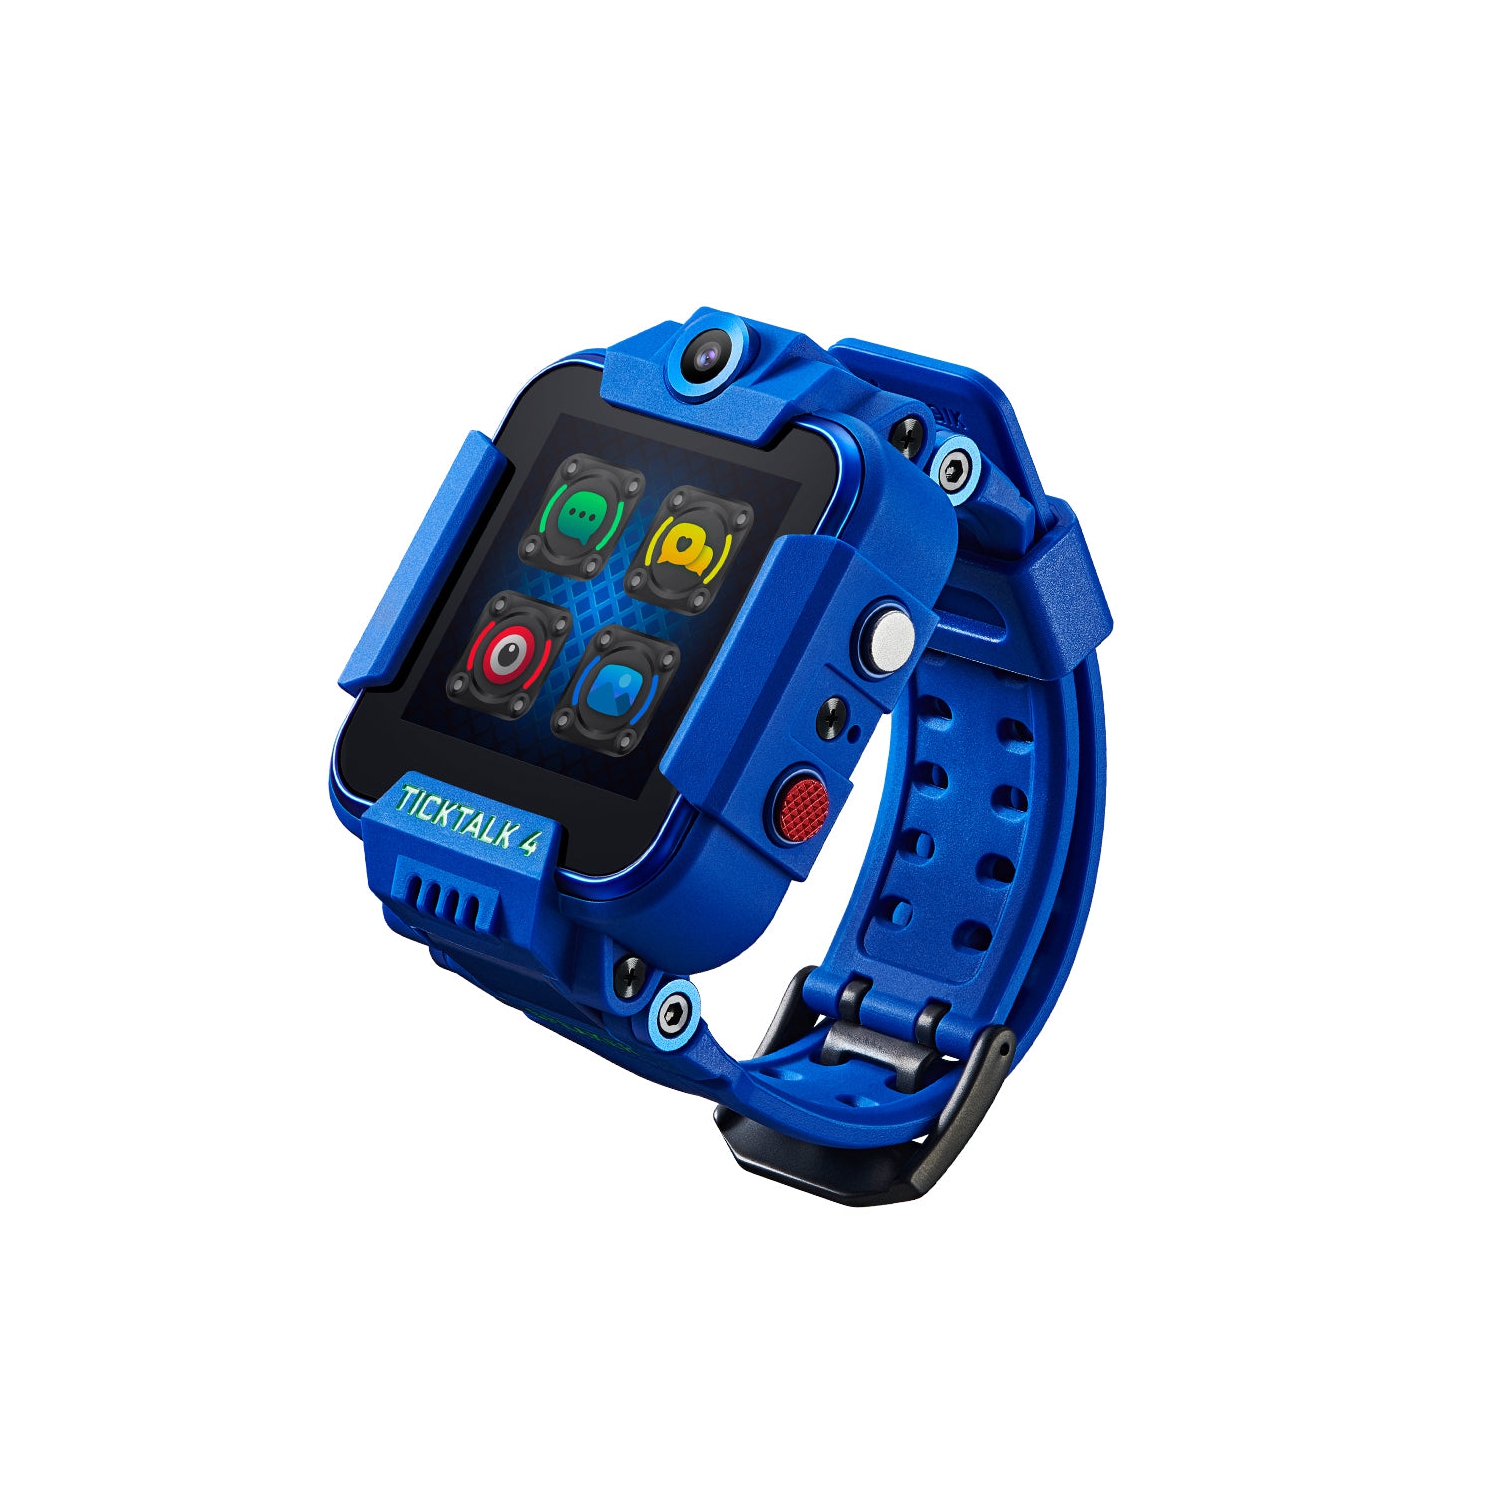 TickTalk 4 Unlocked 4G LTE Kids Smart Watch Phone with GPS Tracker, Combines Video, Voice and Wi-Fi Calling, Messaging & 2x Cameras-Galaxy Blue (No SIM Included)